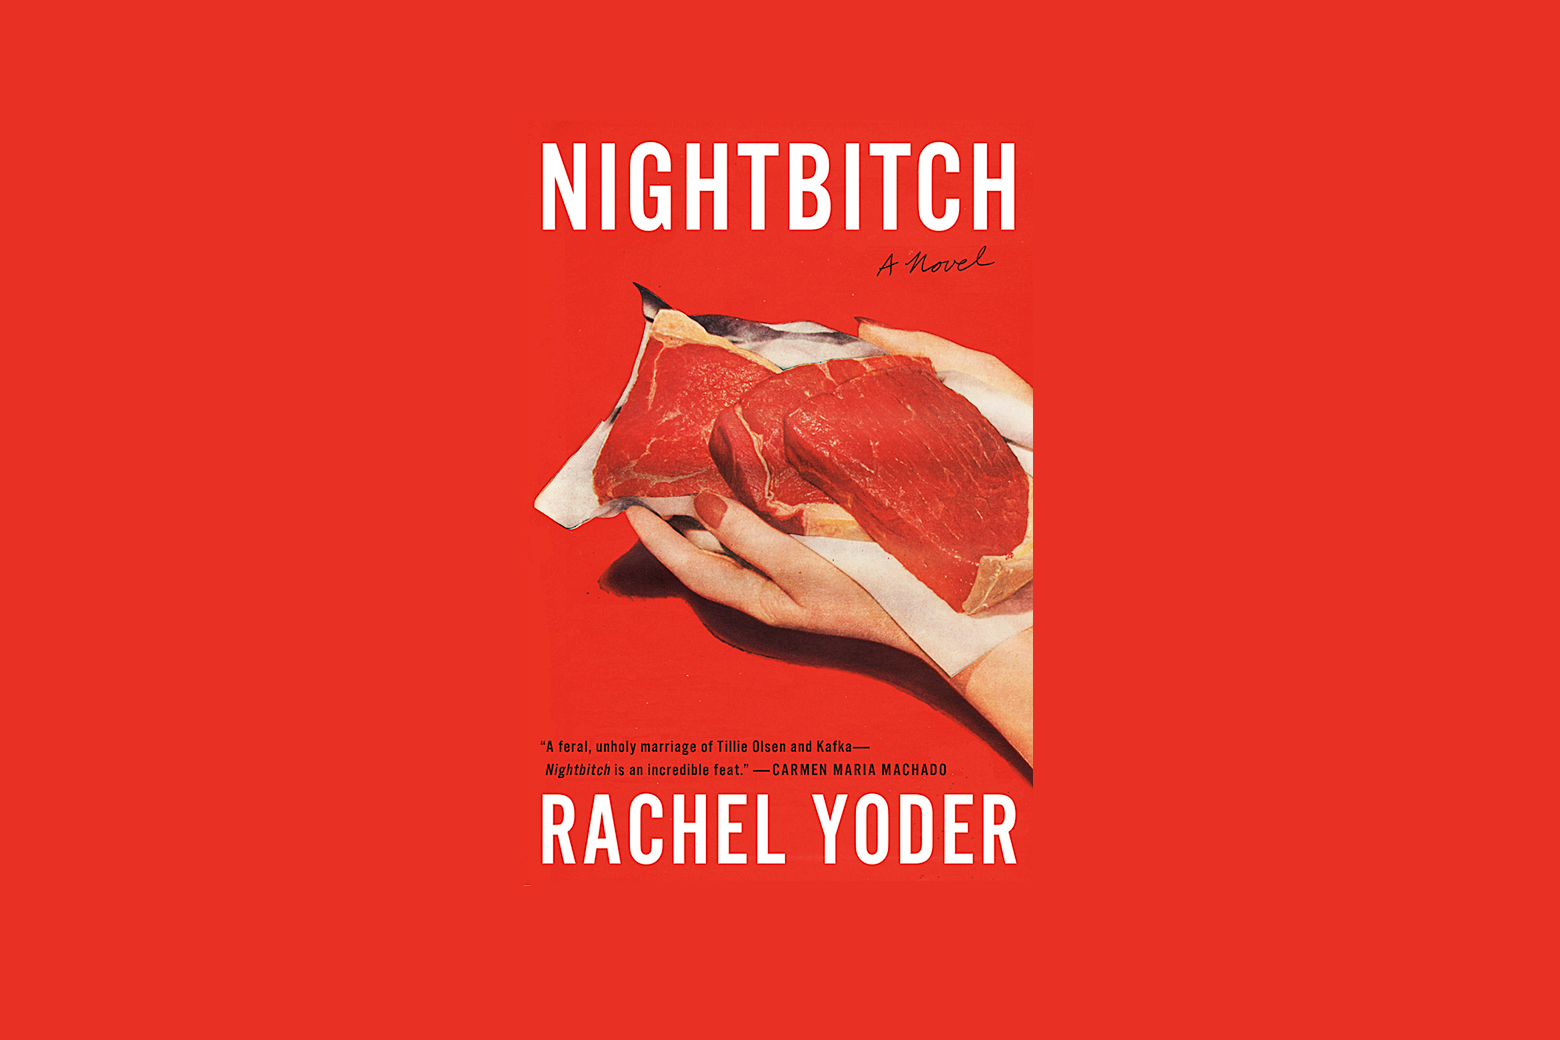 The cover of Nightbitch by Rachel Yoder depicting a woman's hand holding a piece of raw meat.